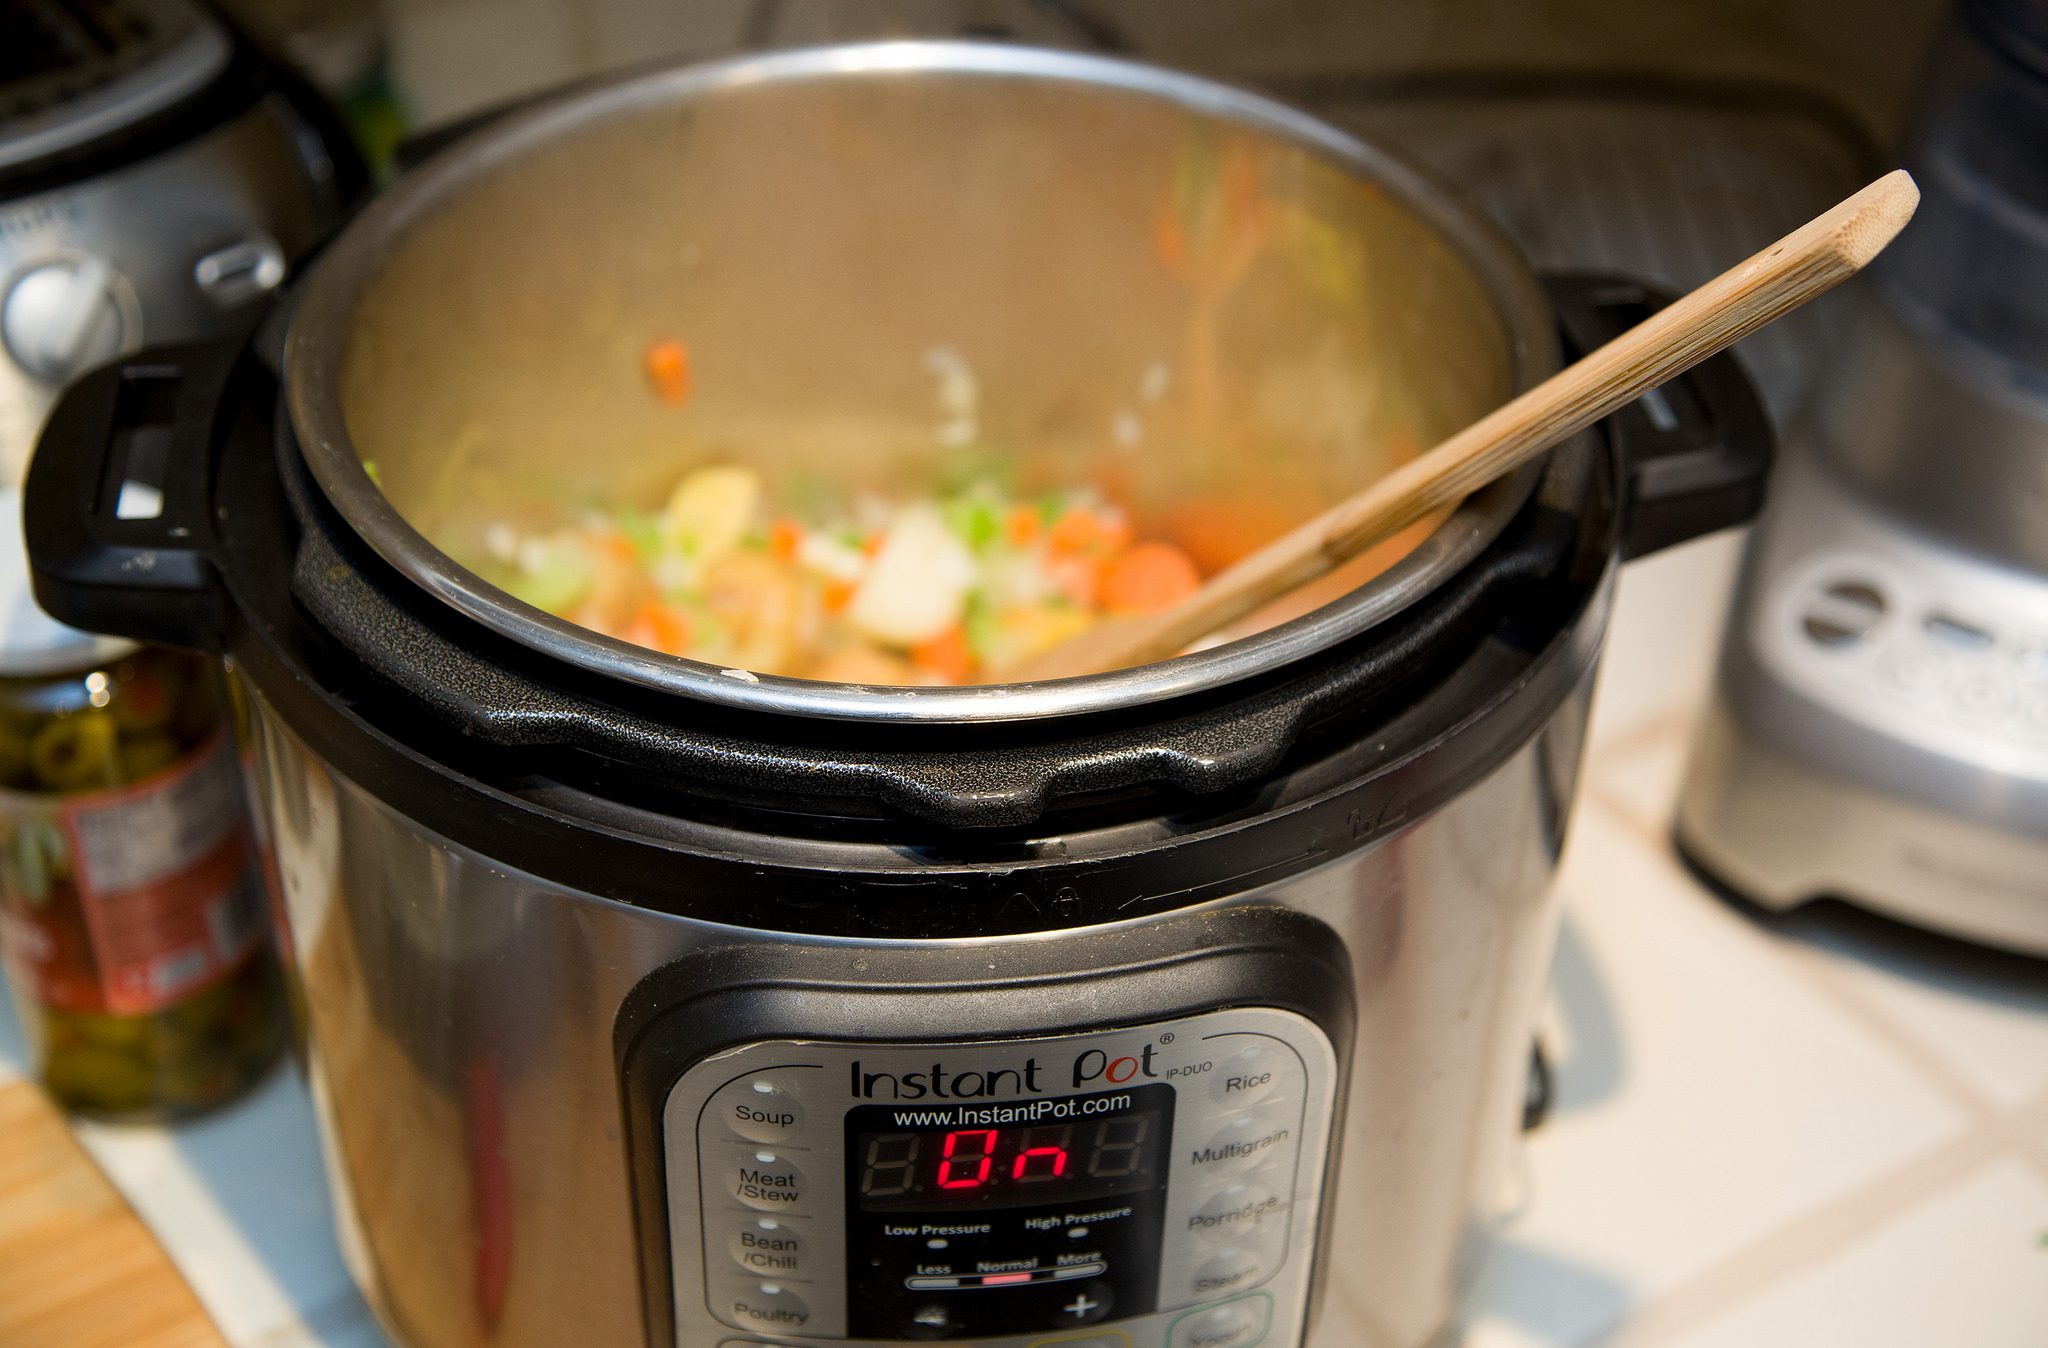 Company "Instant Pot" recently issued a warning to owners...